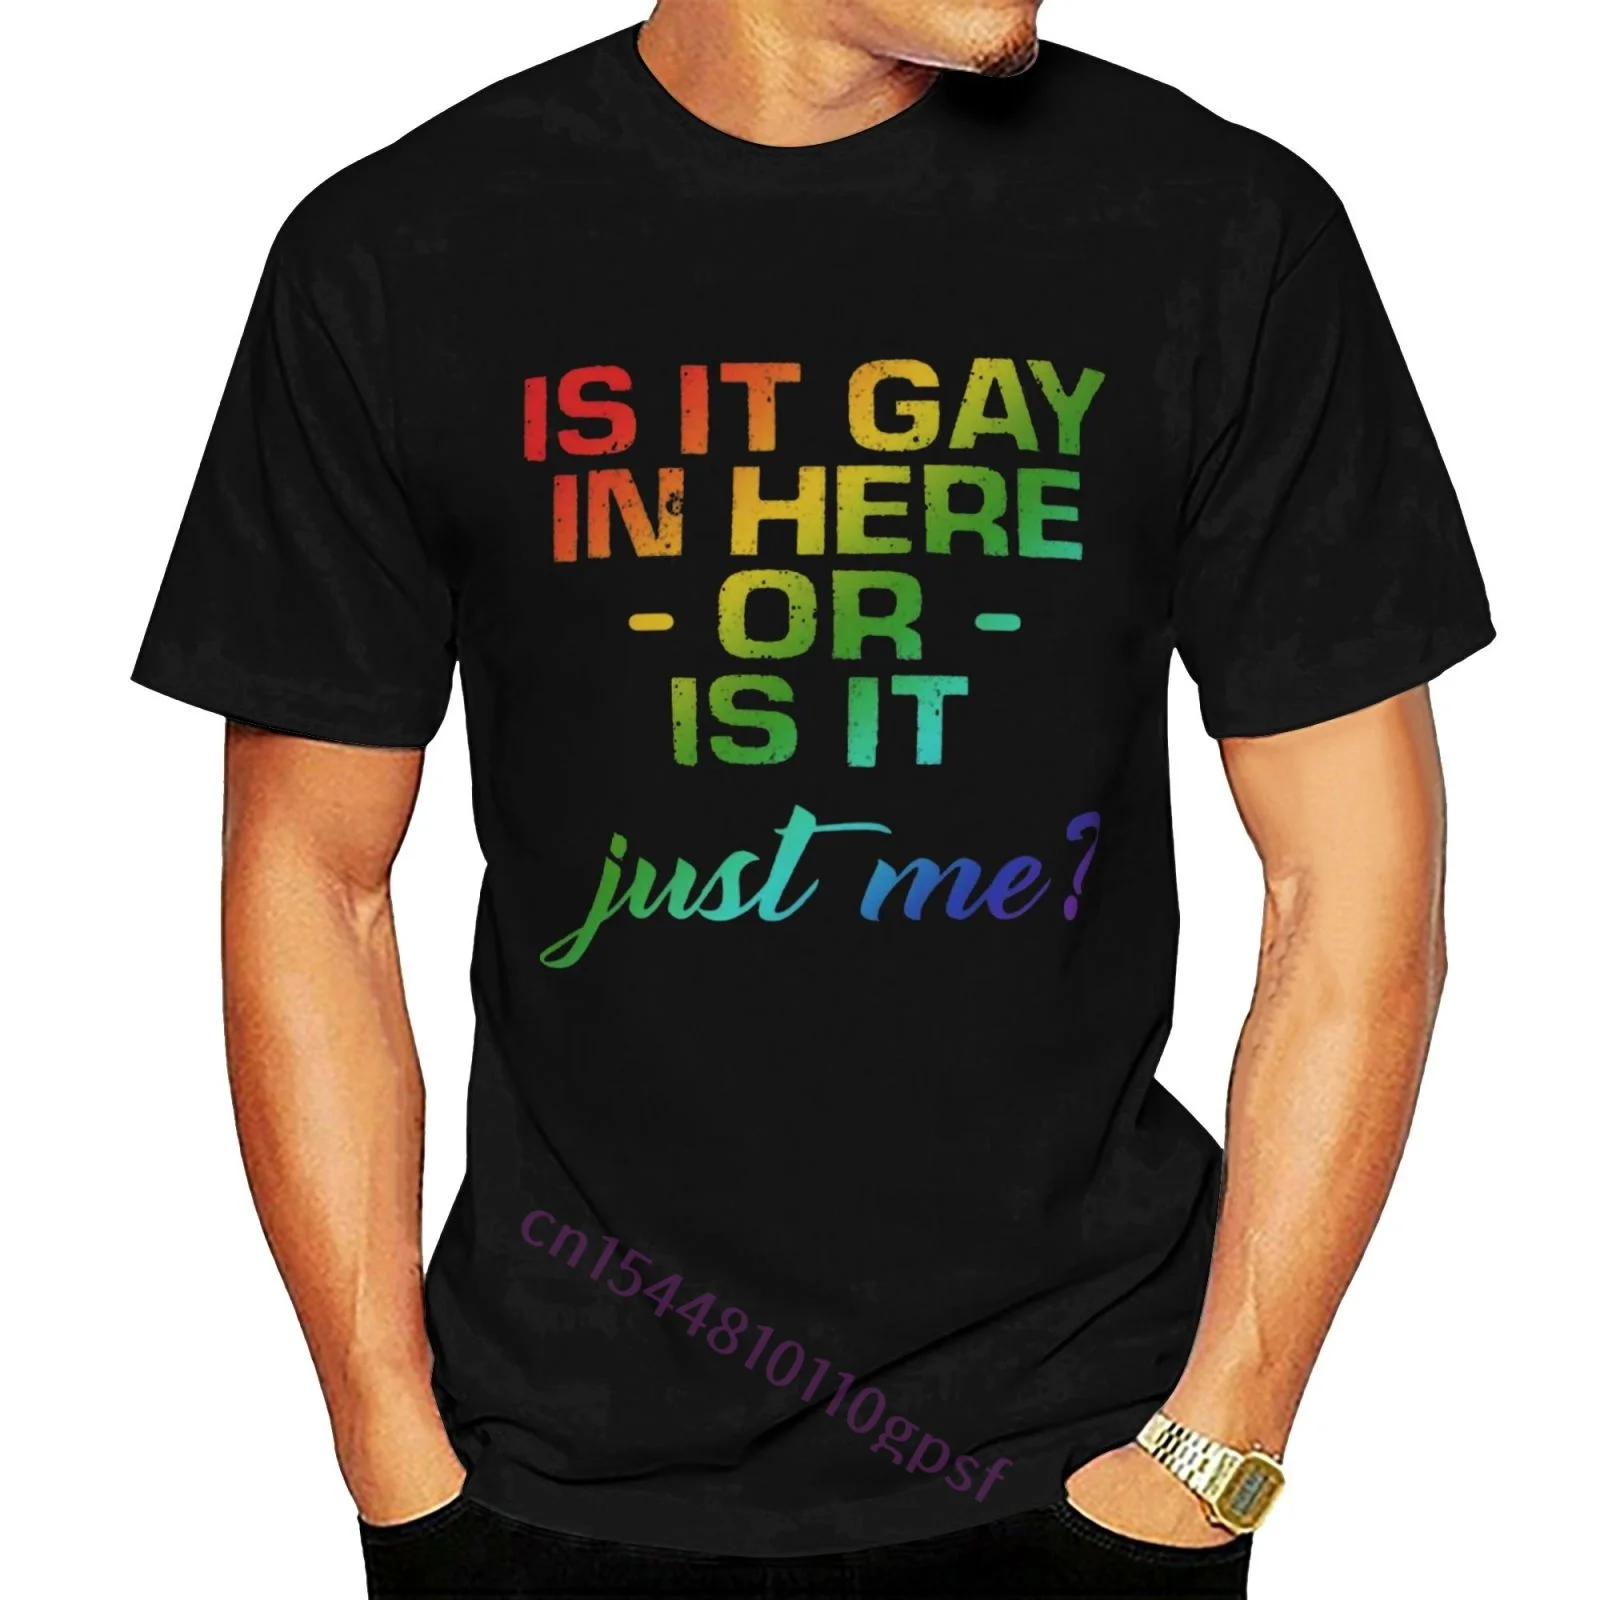 

Gay In Here Or Is It Just Me T-Shirt Men Short Sleeve Humor Tee Shirt Round Neck 100% Cotton Funny Graphic T Shirt